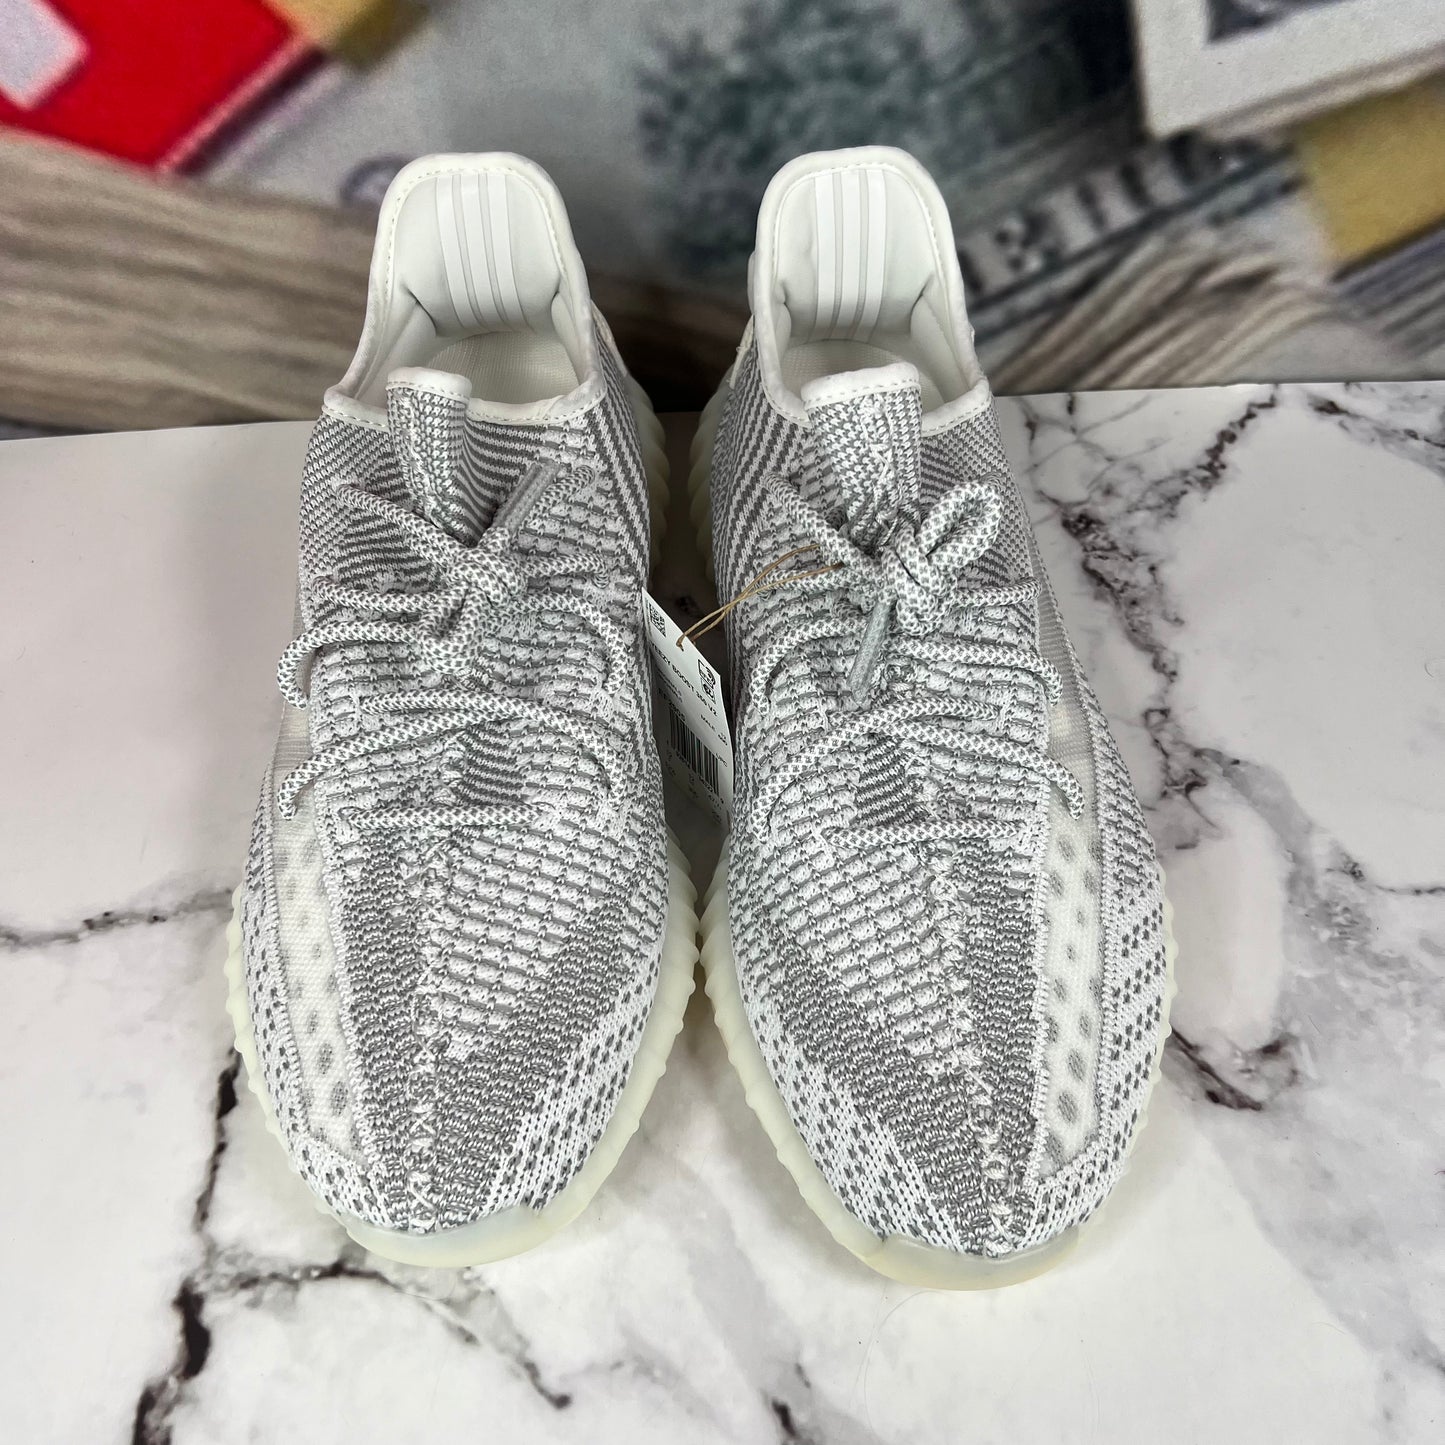 Yeezy Boost 350 V2 ‘Static Non-Reflective’